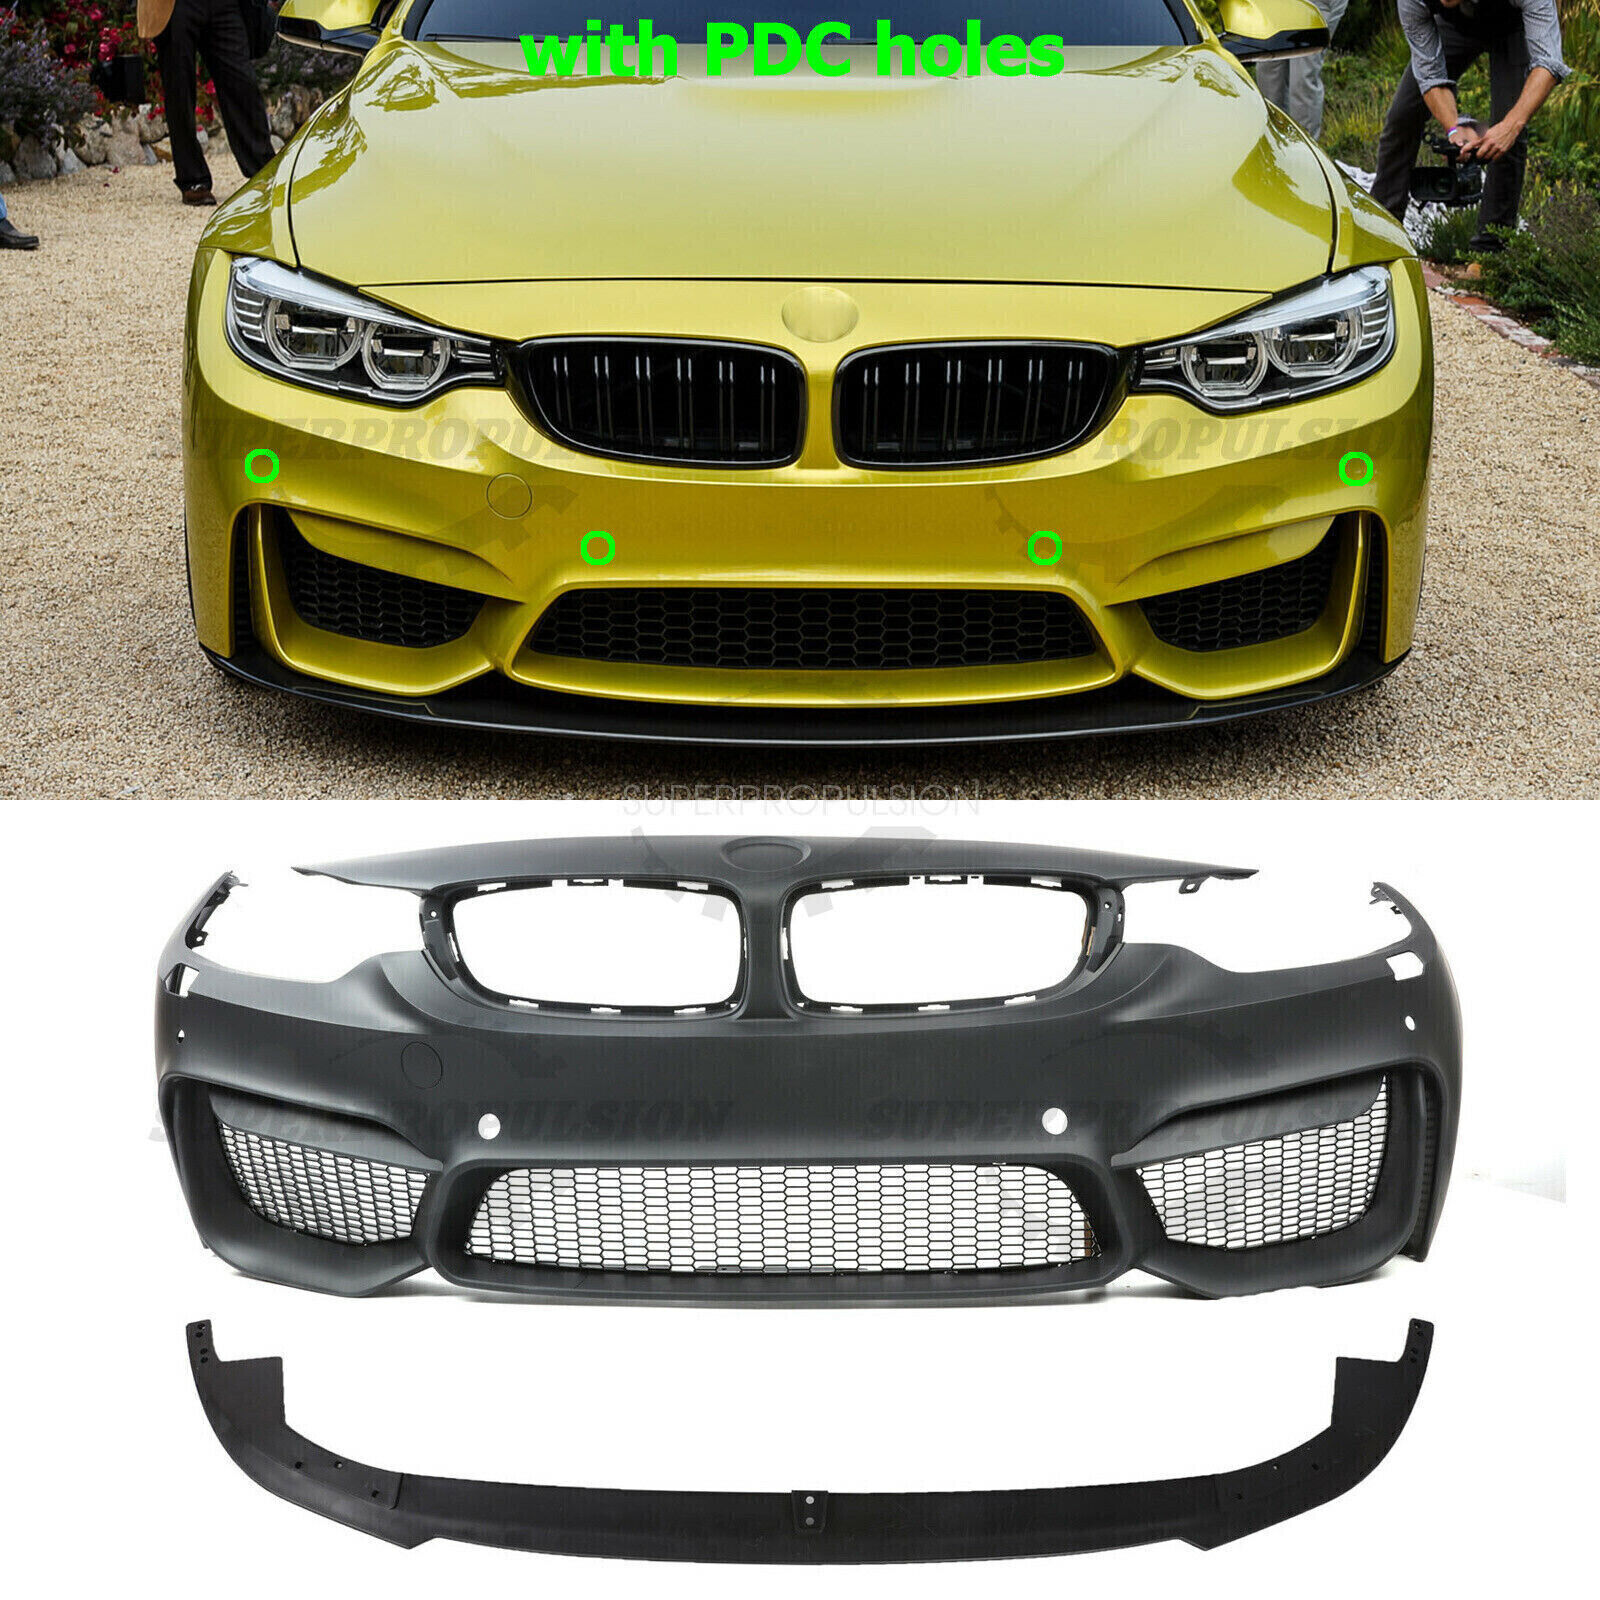 M4 Style Front Bumper Cover With PDC Holes For  BMW F32 F33 F36 4 SERIES 14-19